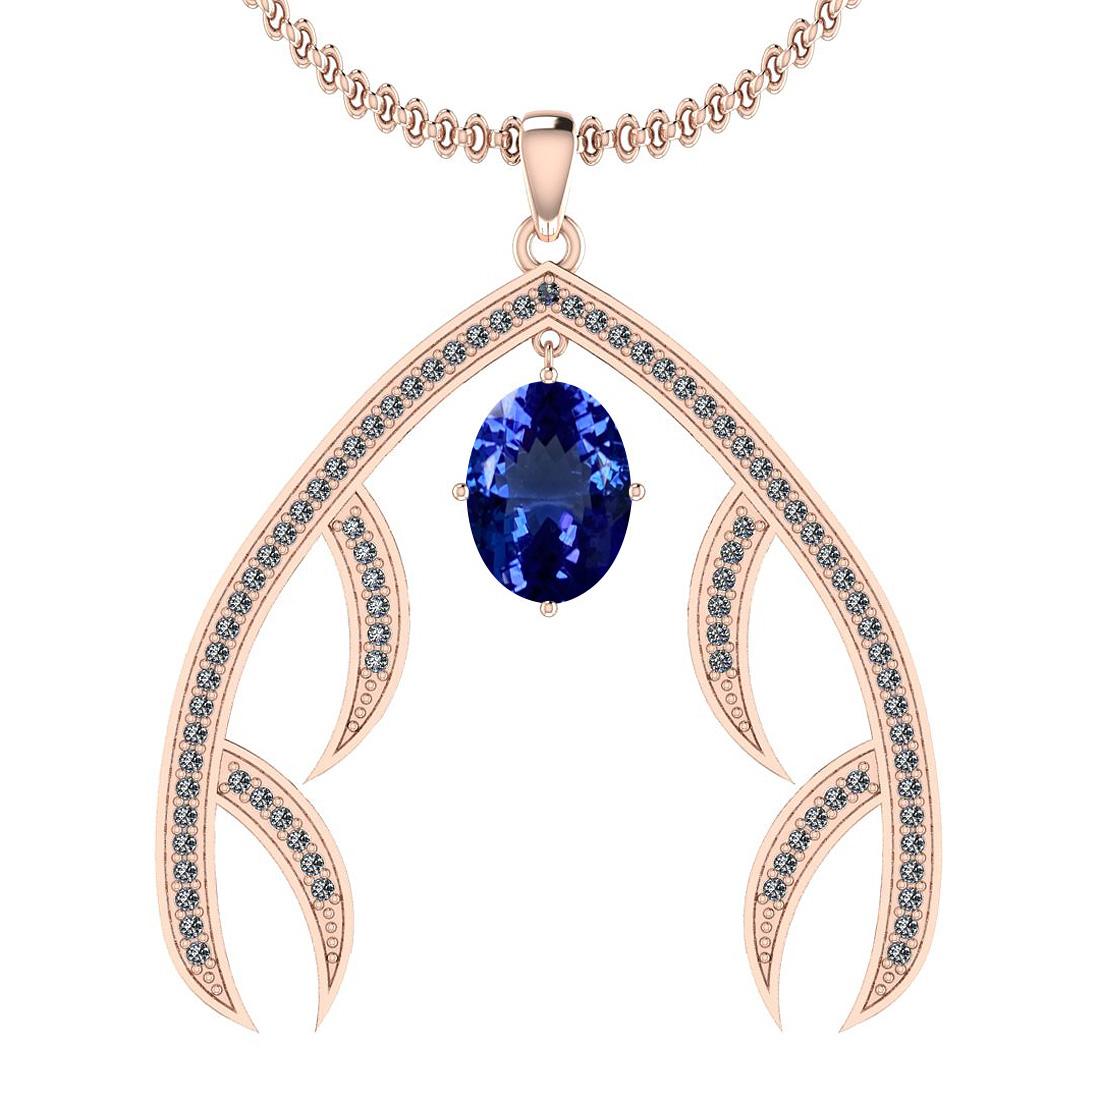 Certified 5.17 Ctw VS/SI1 Tanzanite And Diamond 14k Rose Gold Victorian Style Necklace